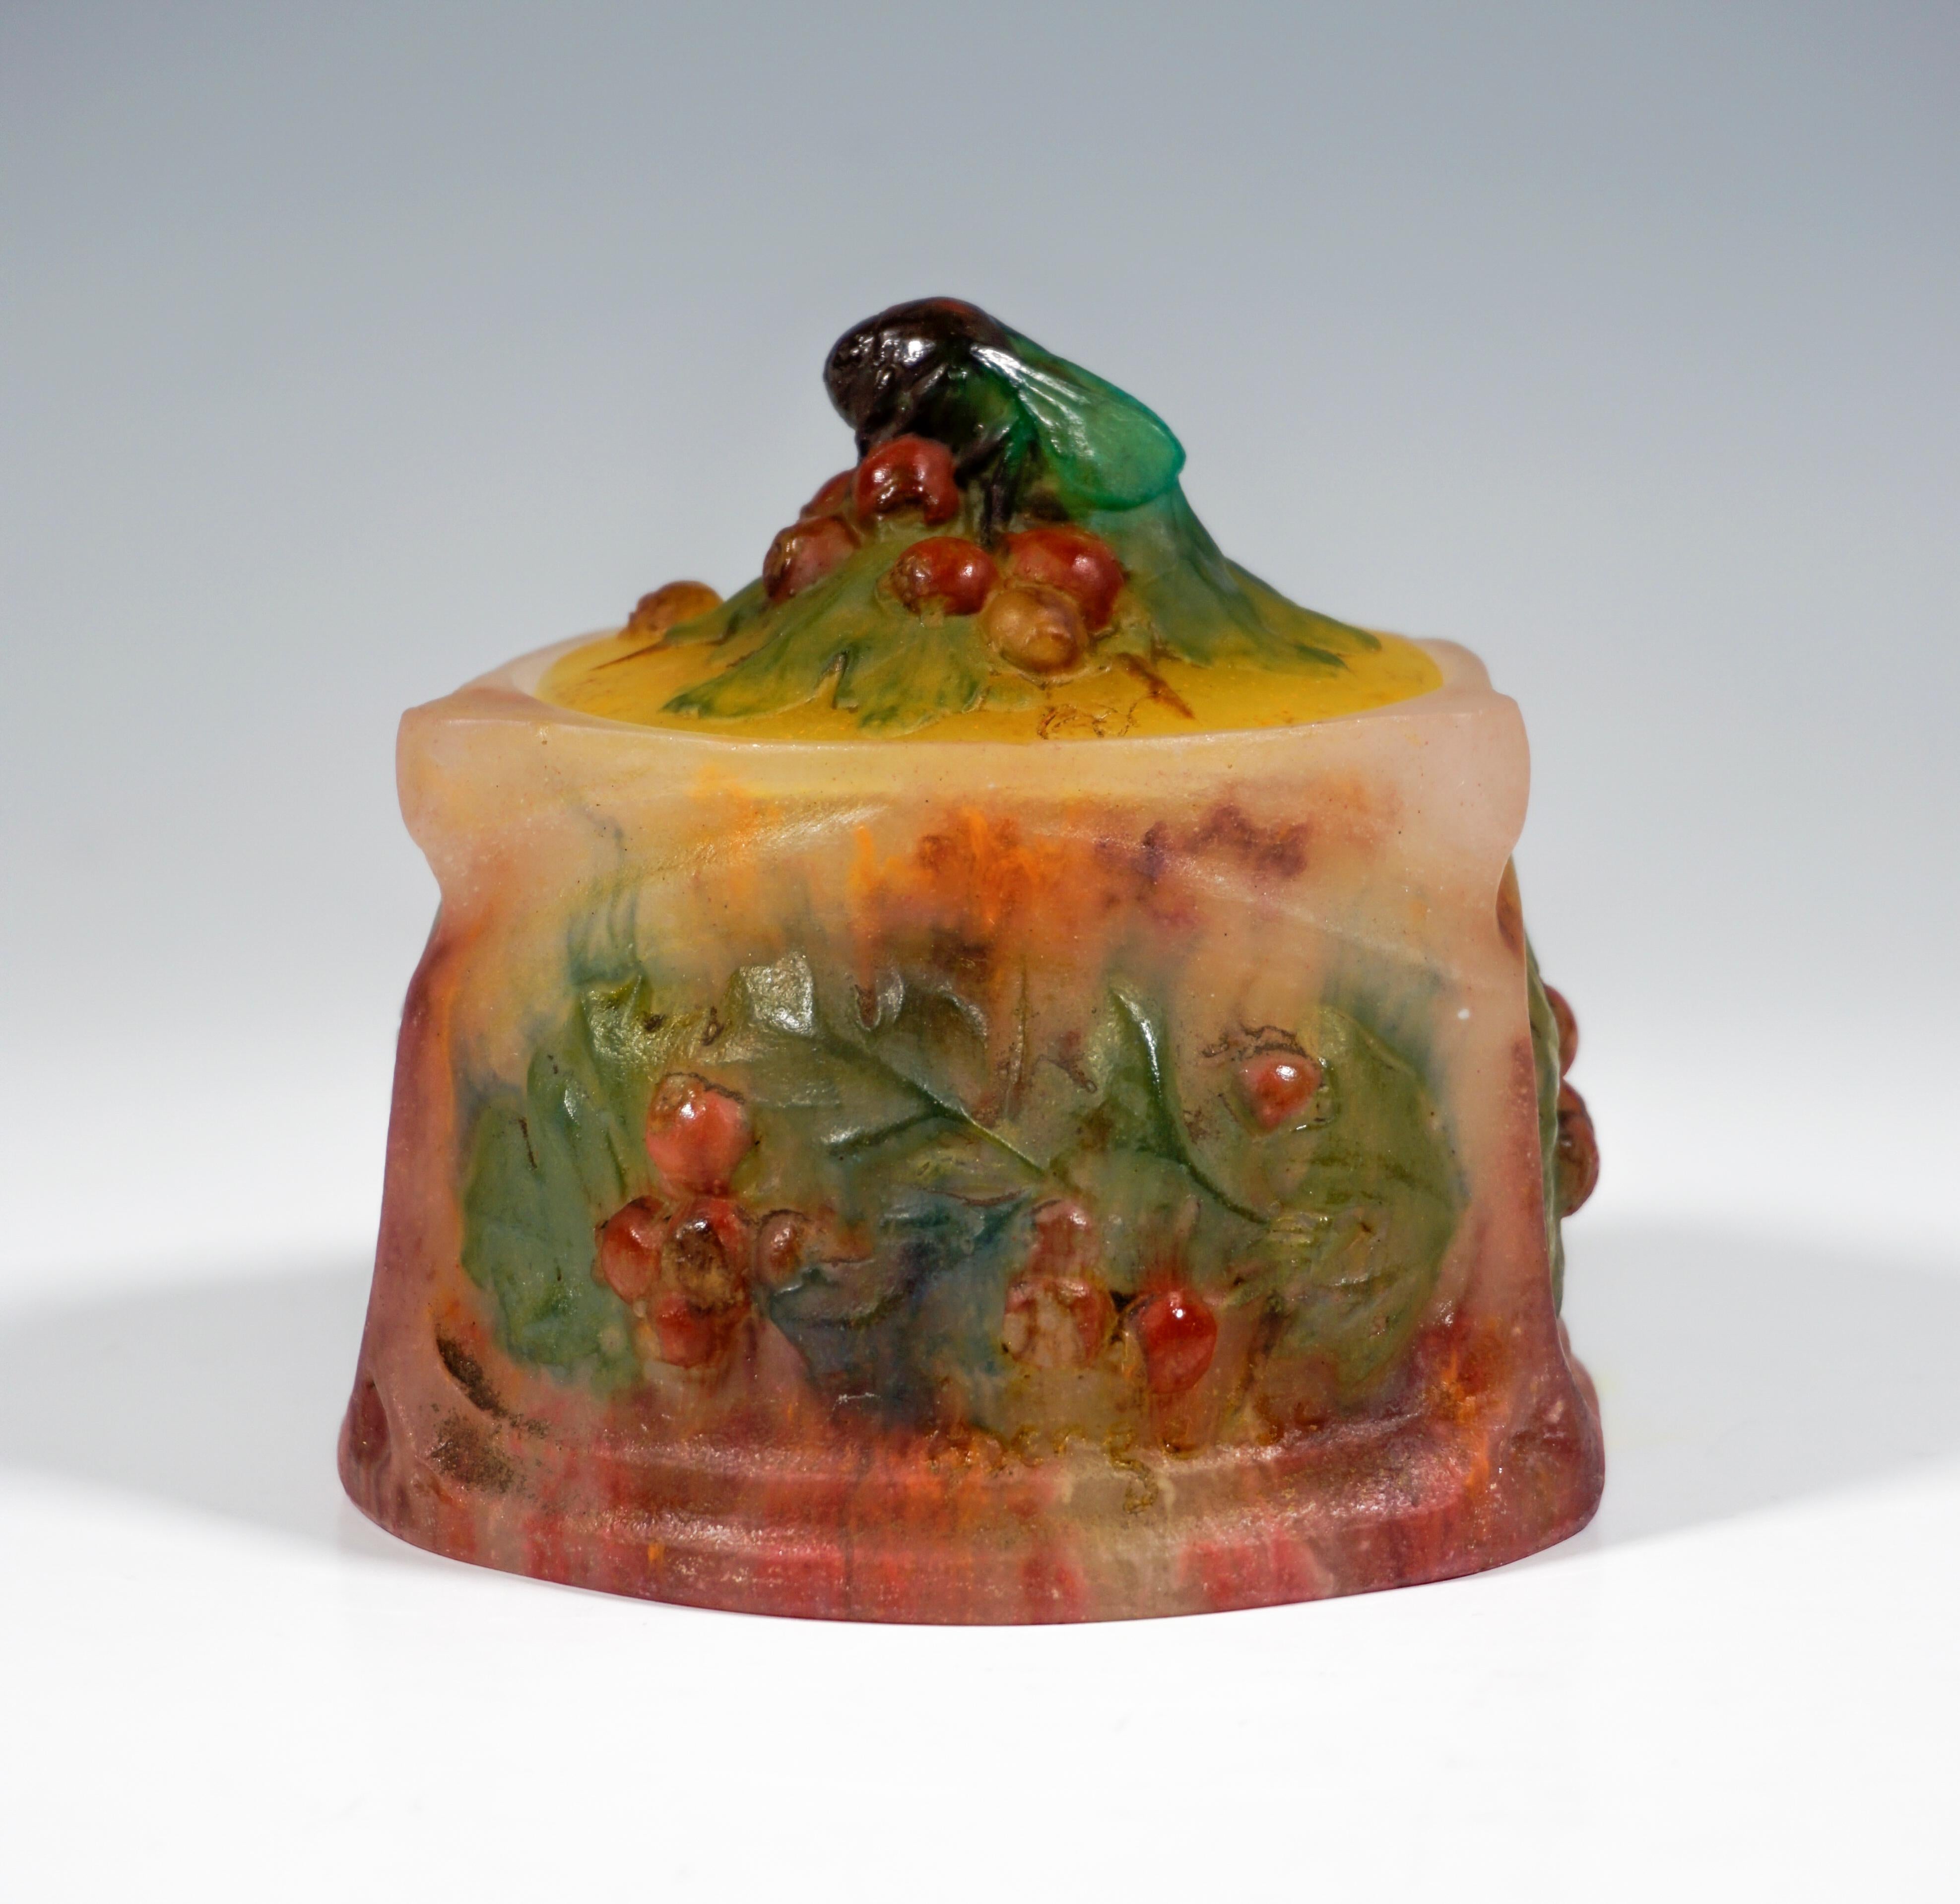 Round lidded box, bowl divided by pilaster and frames into three panels filled with leaves and flowers in relief, flat, round lid with a bumblebee enthroned on leaves and berries as a knob. Signed 'AWALTER NANCY' and 'hBergé SC' on the walls and